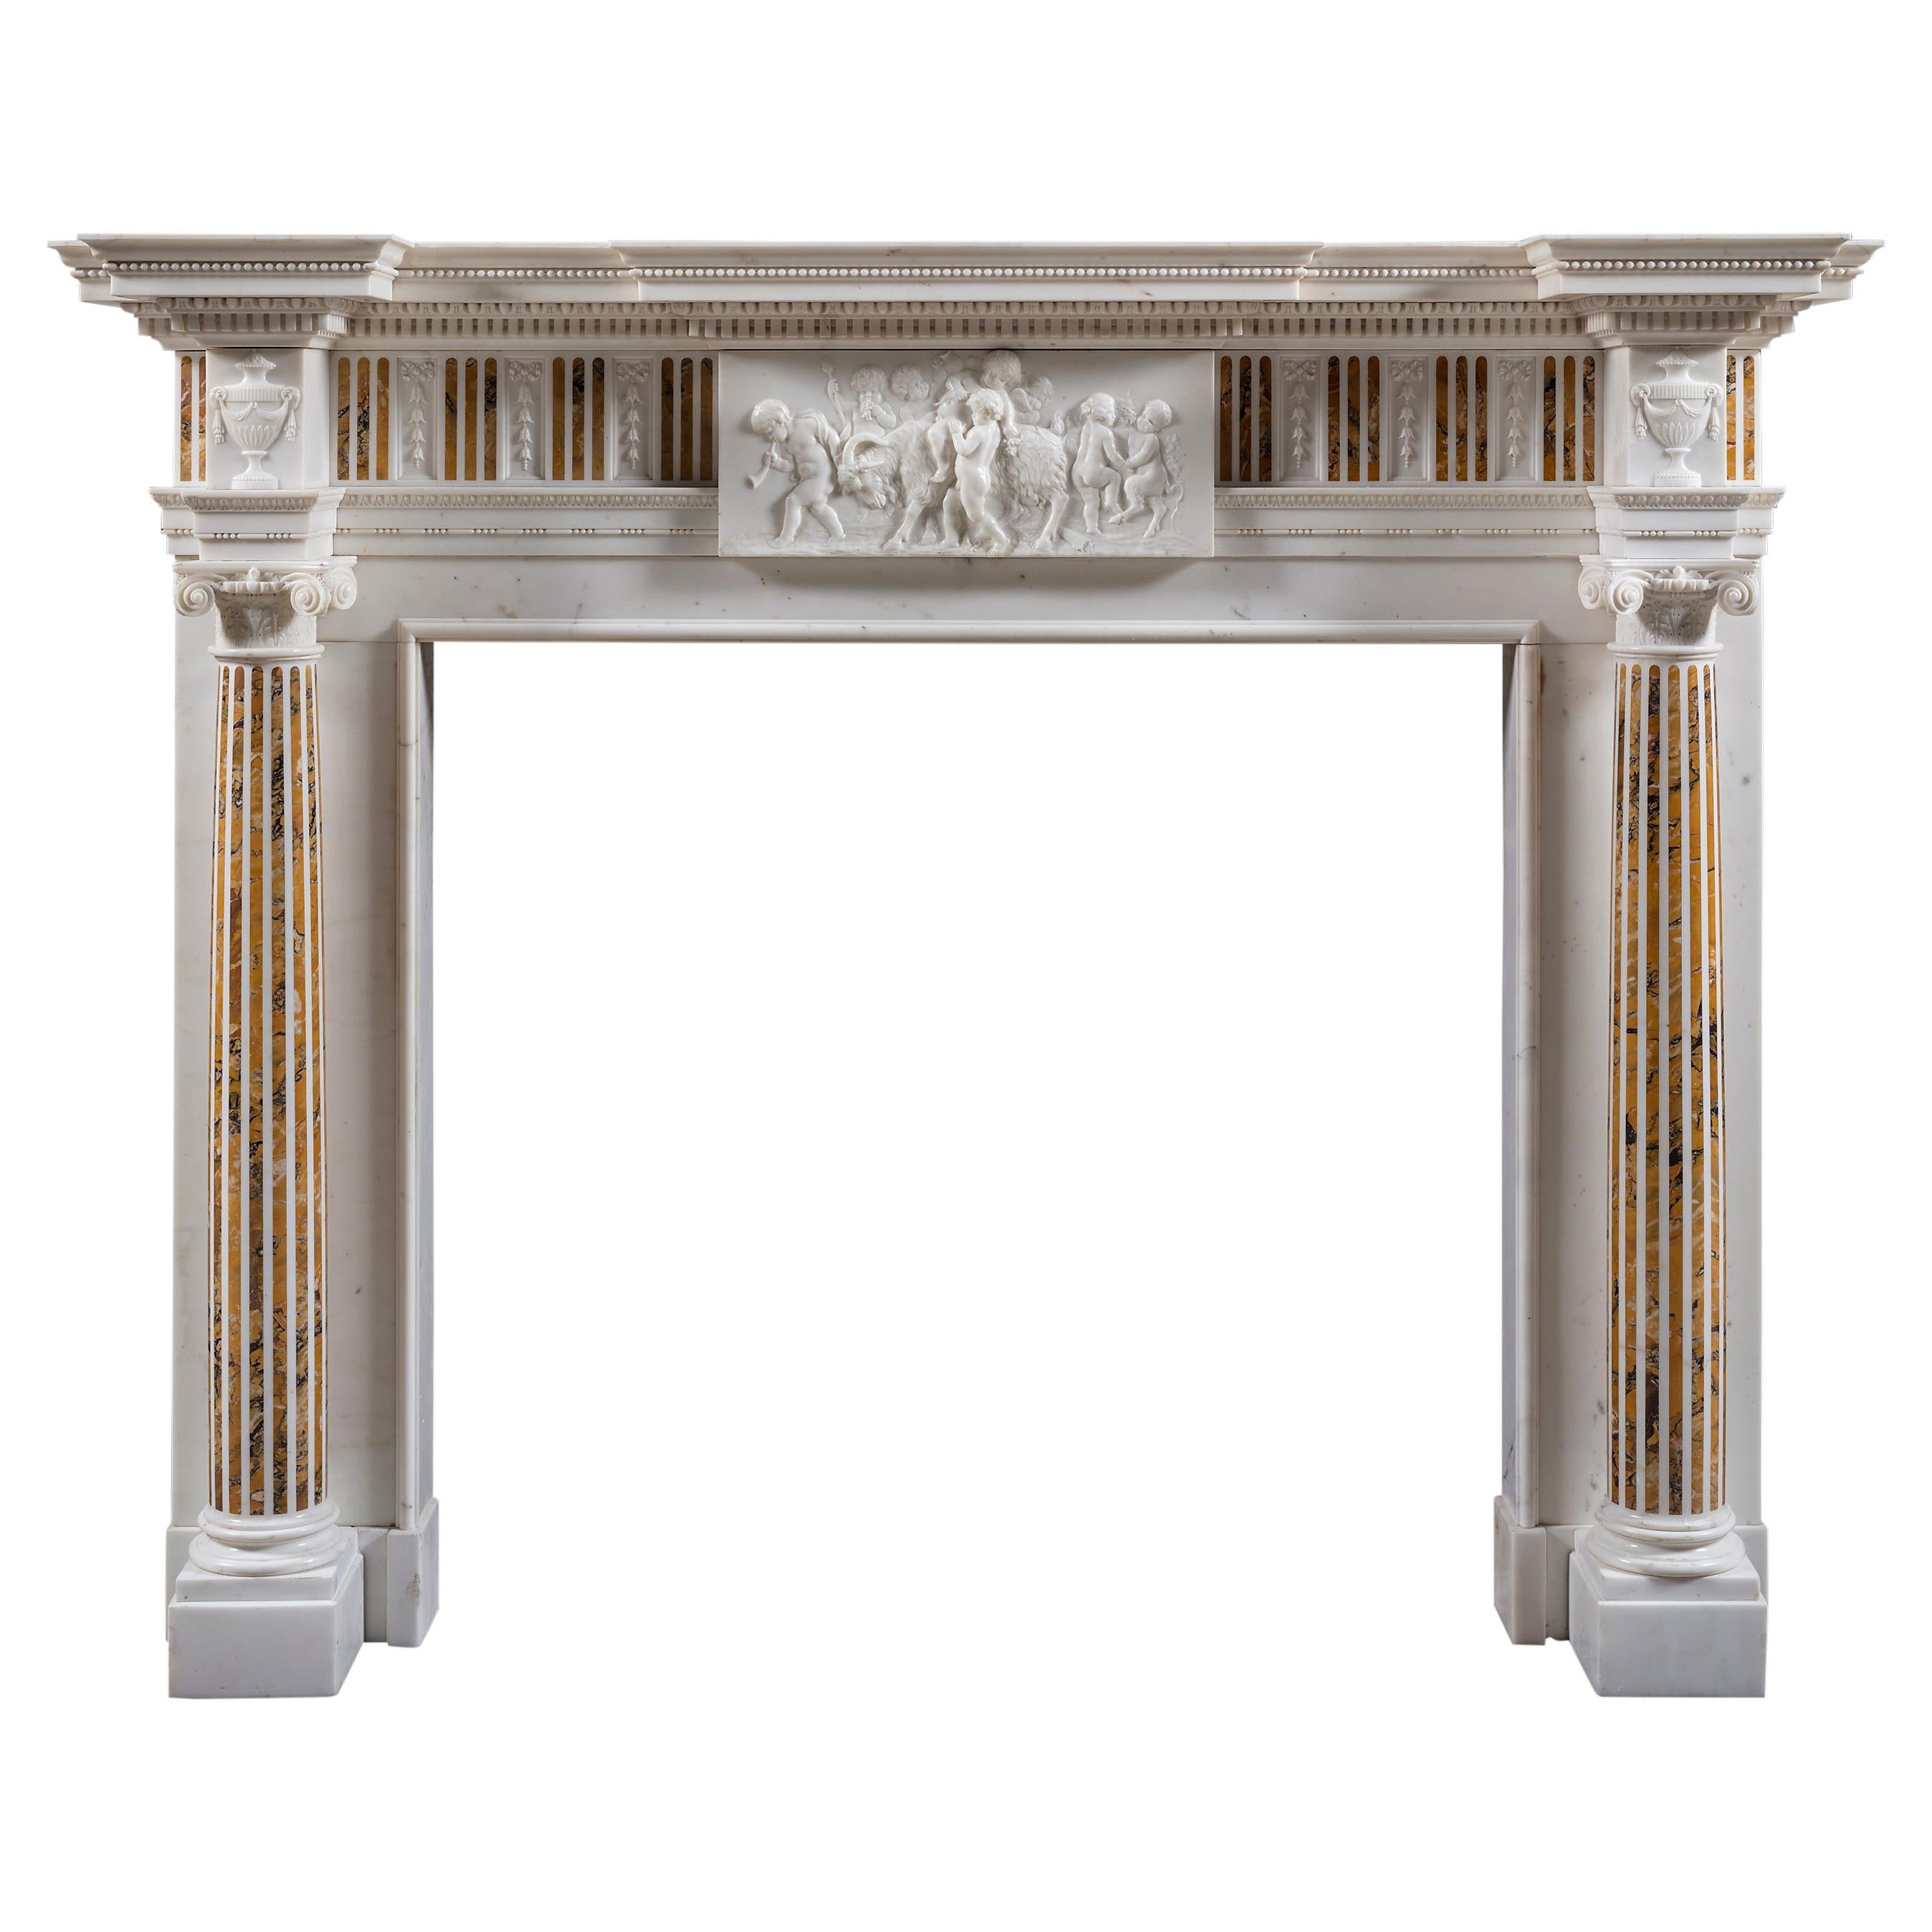 Late 18th Century Statuary and Sienna Marble Fireplace